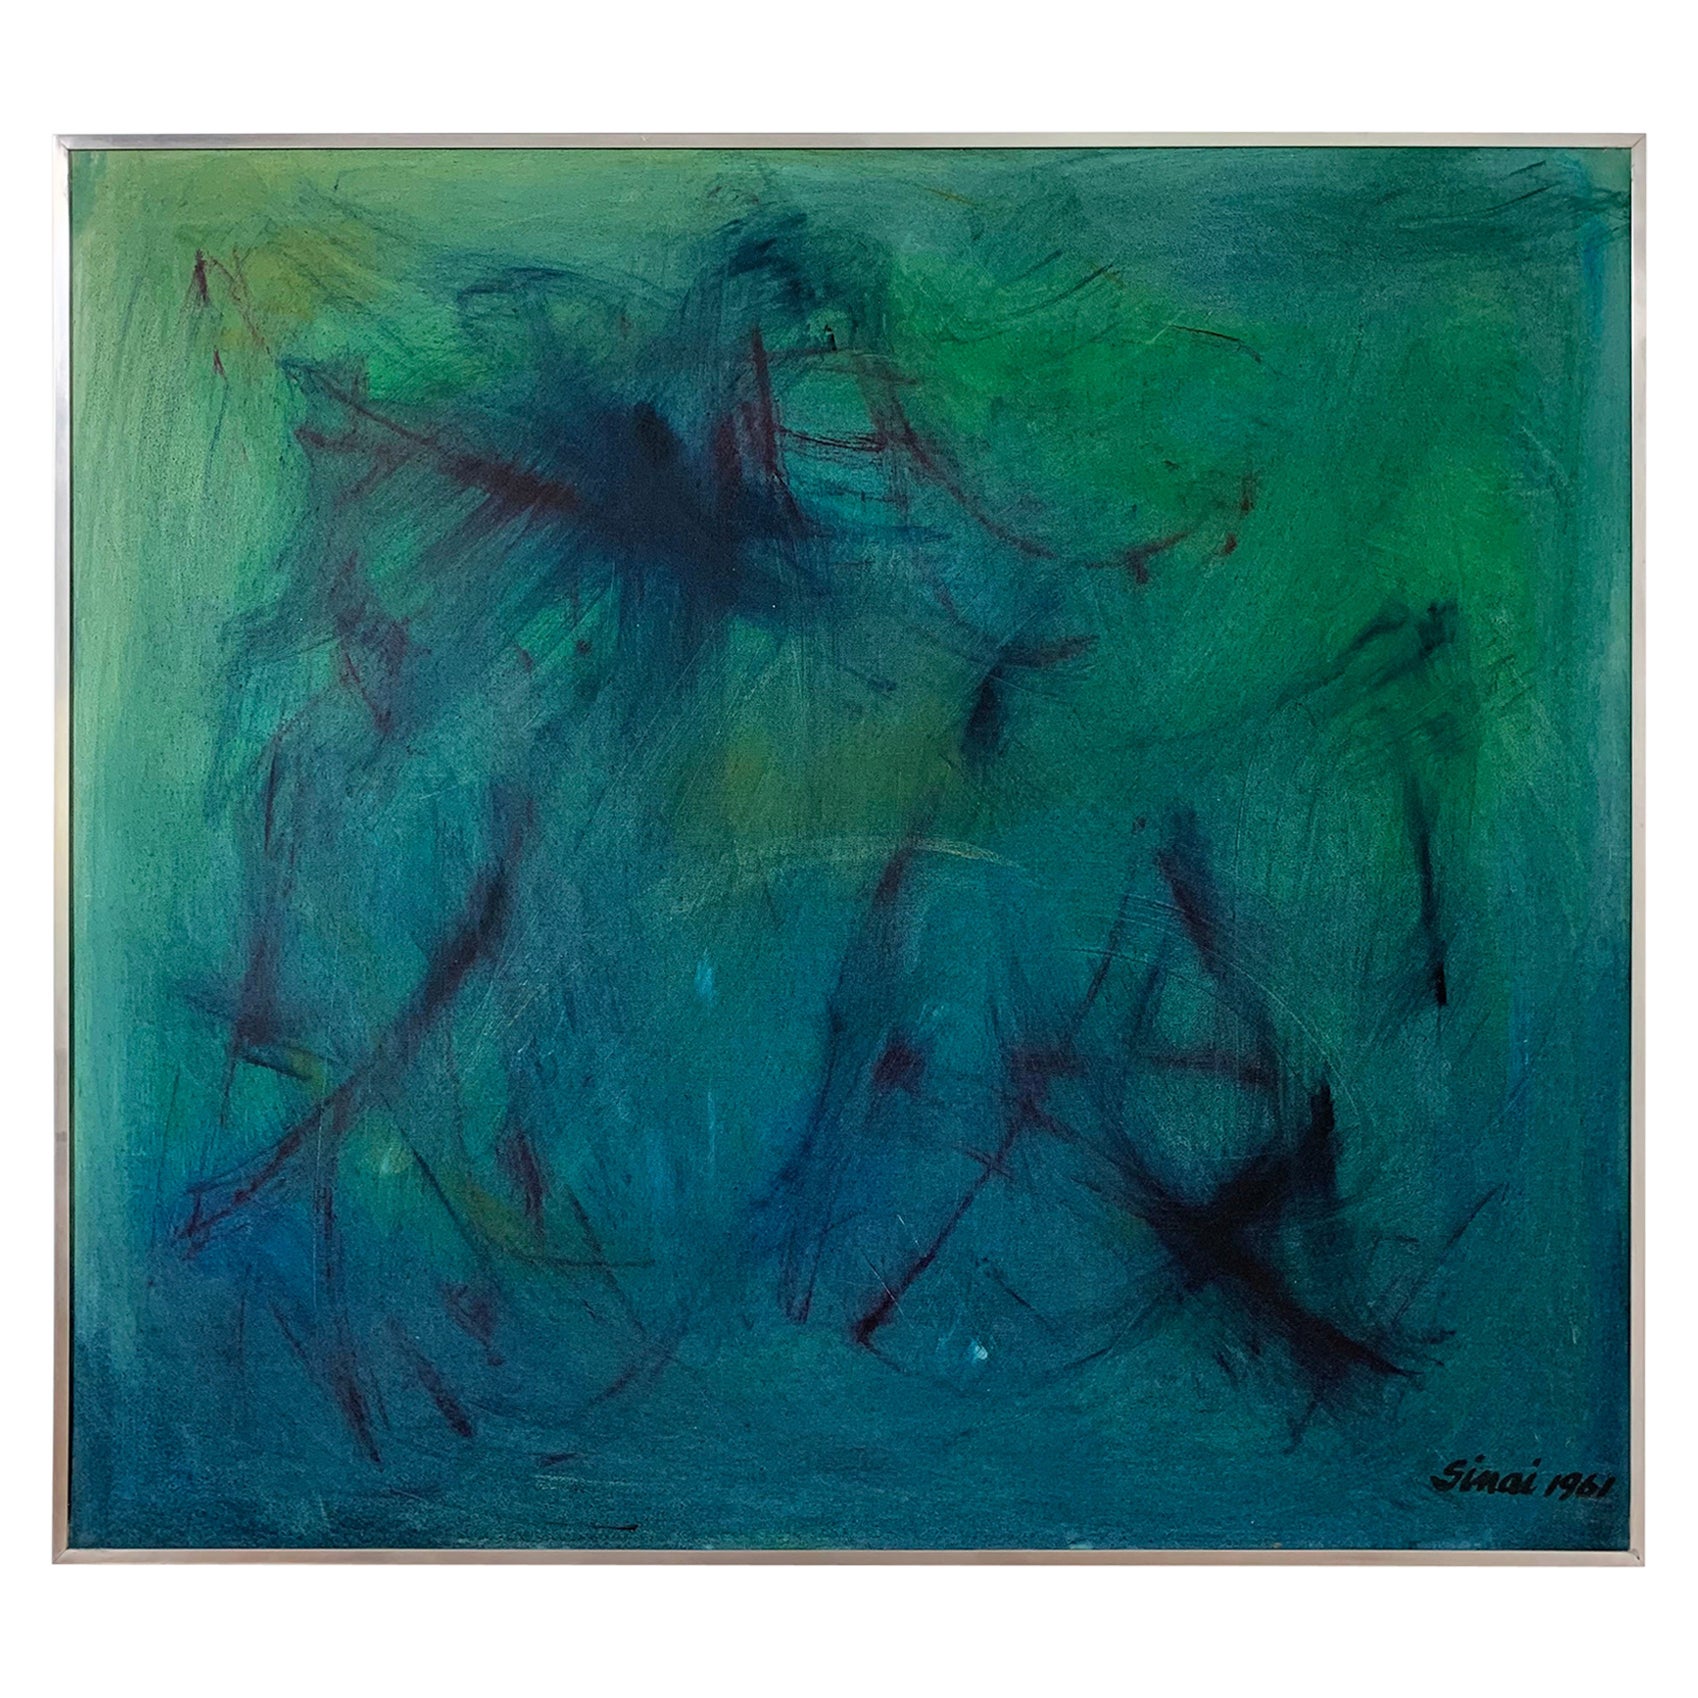 Expressionist Painting by Sinai Waxman, D. 1961